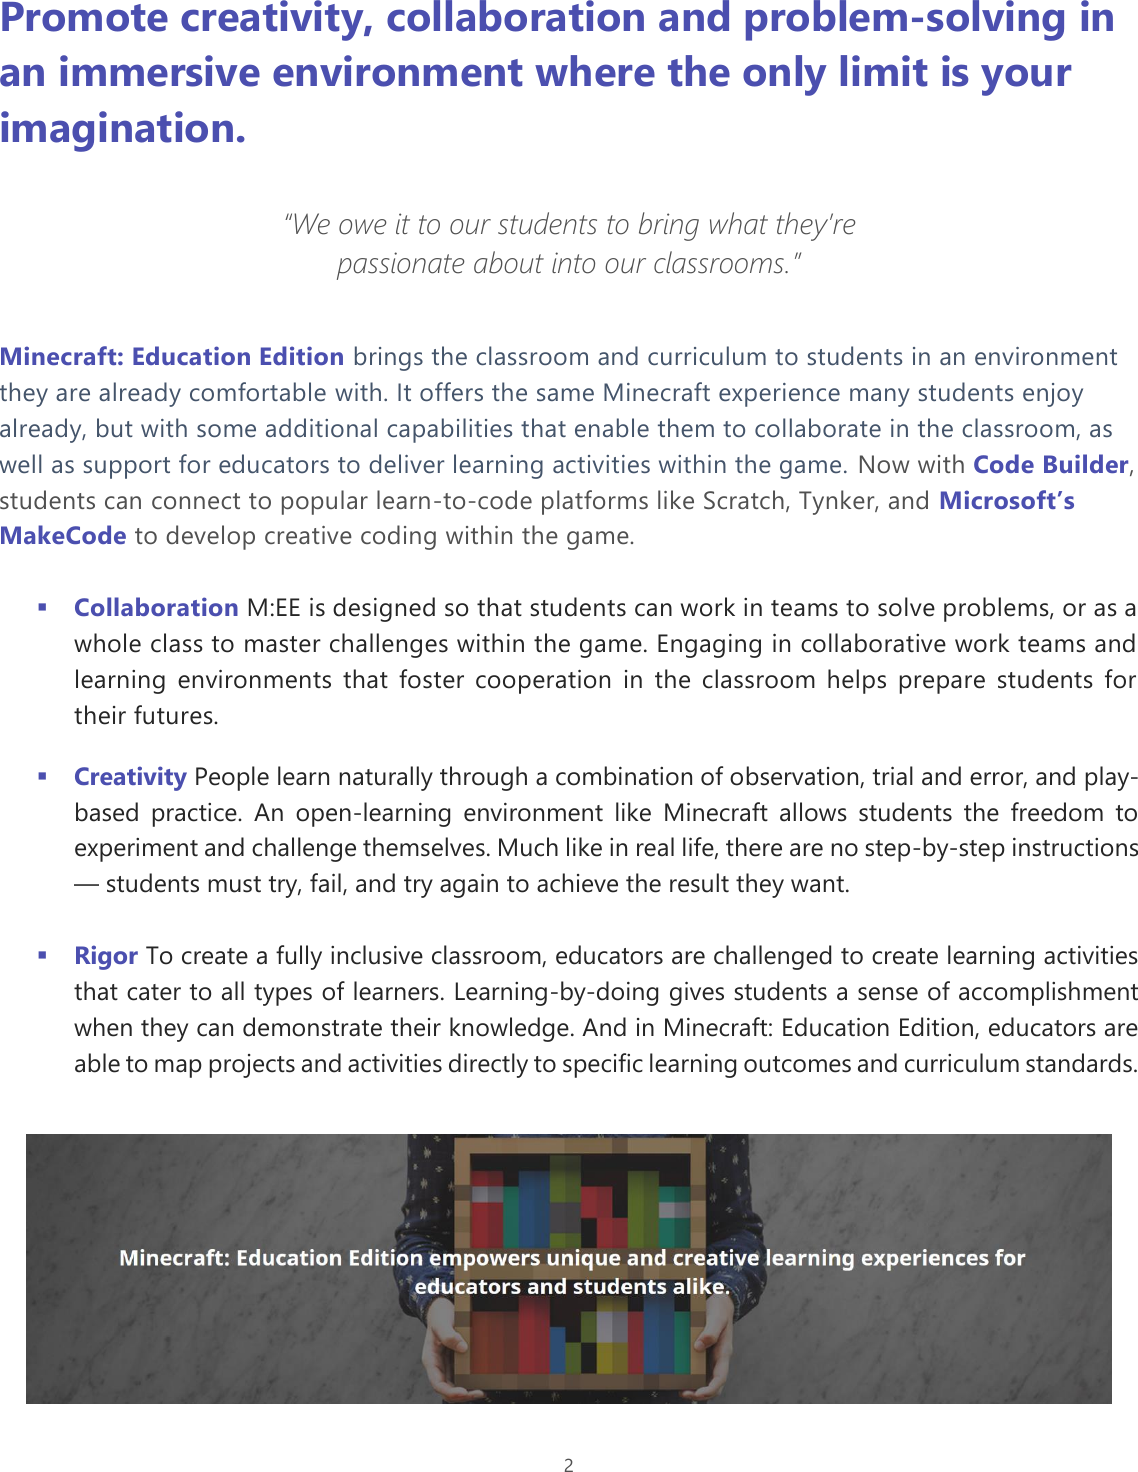 Page 2 of 11 - Microsoft Teams Team Leader Getting Started Guide MEE Educator Deployment